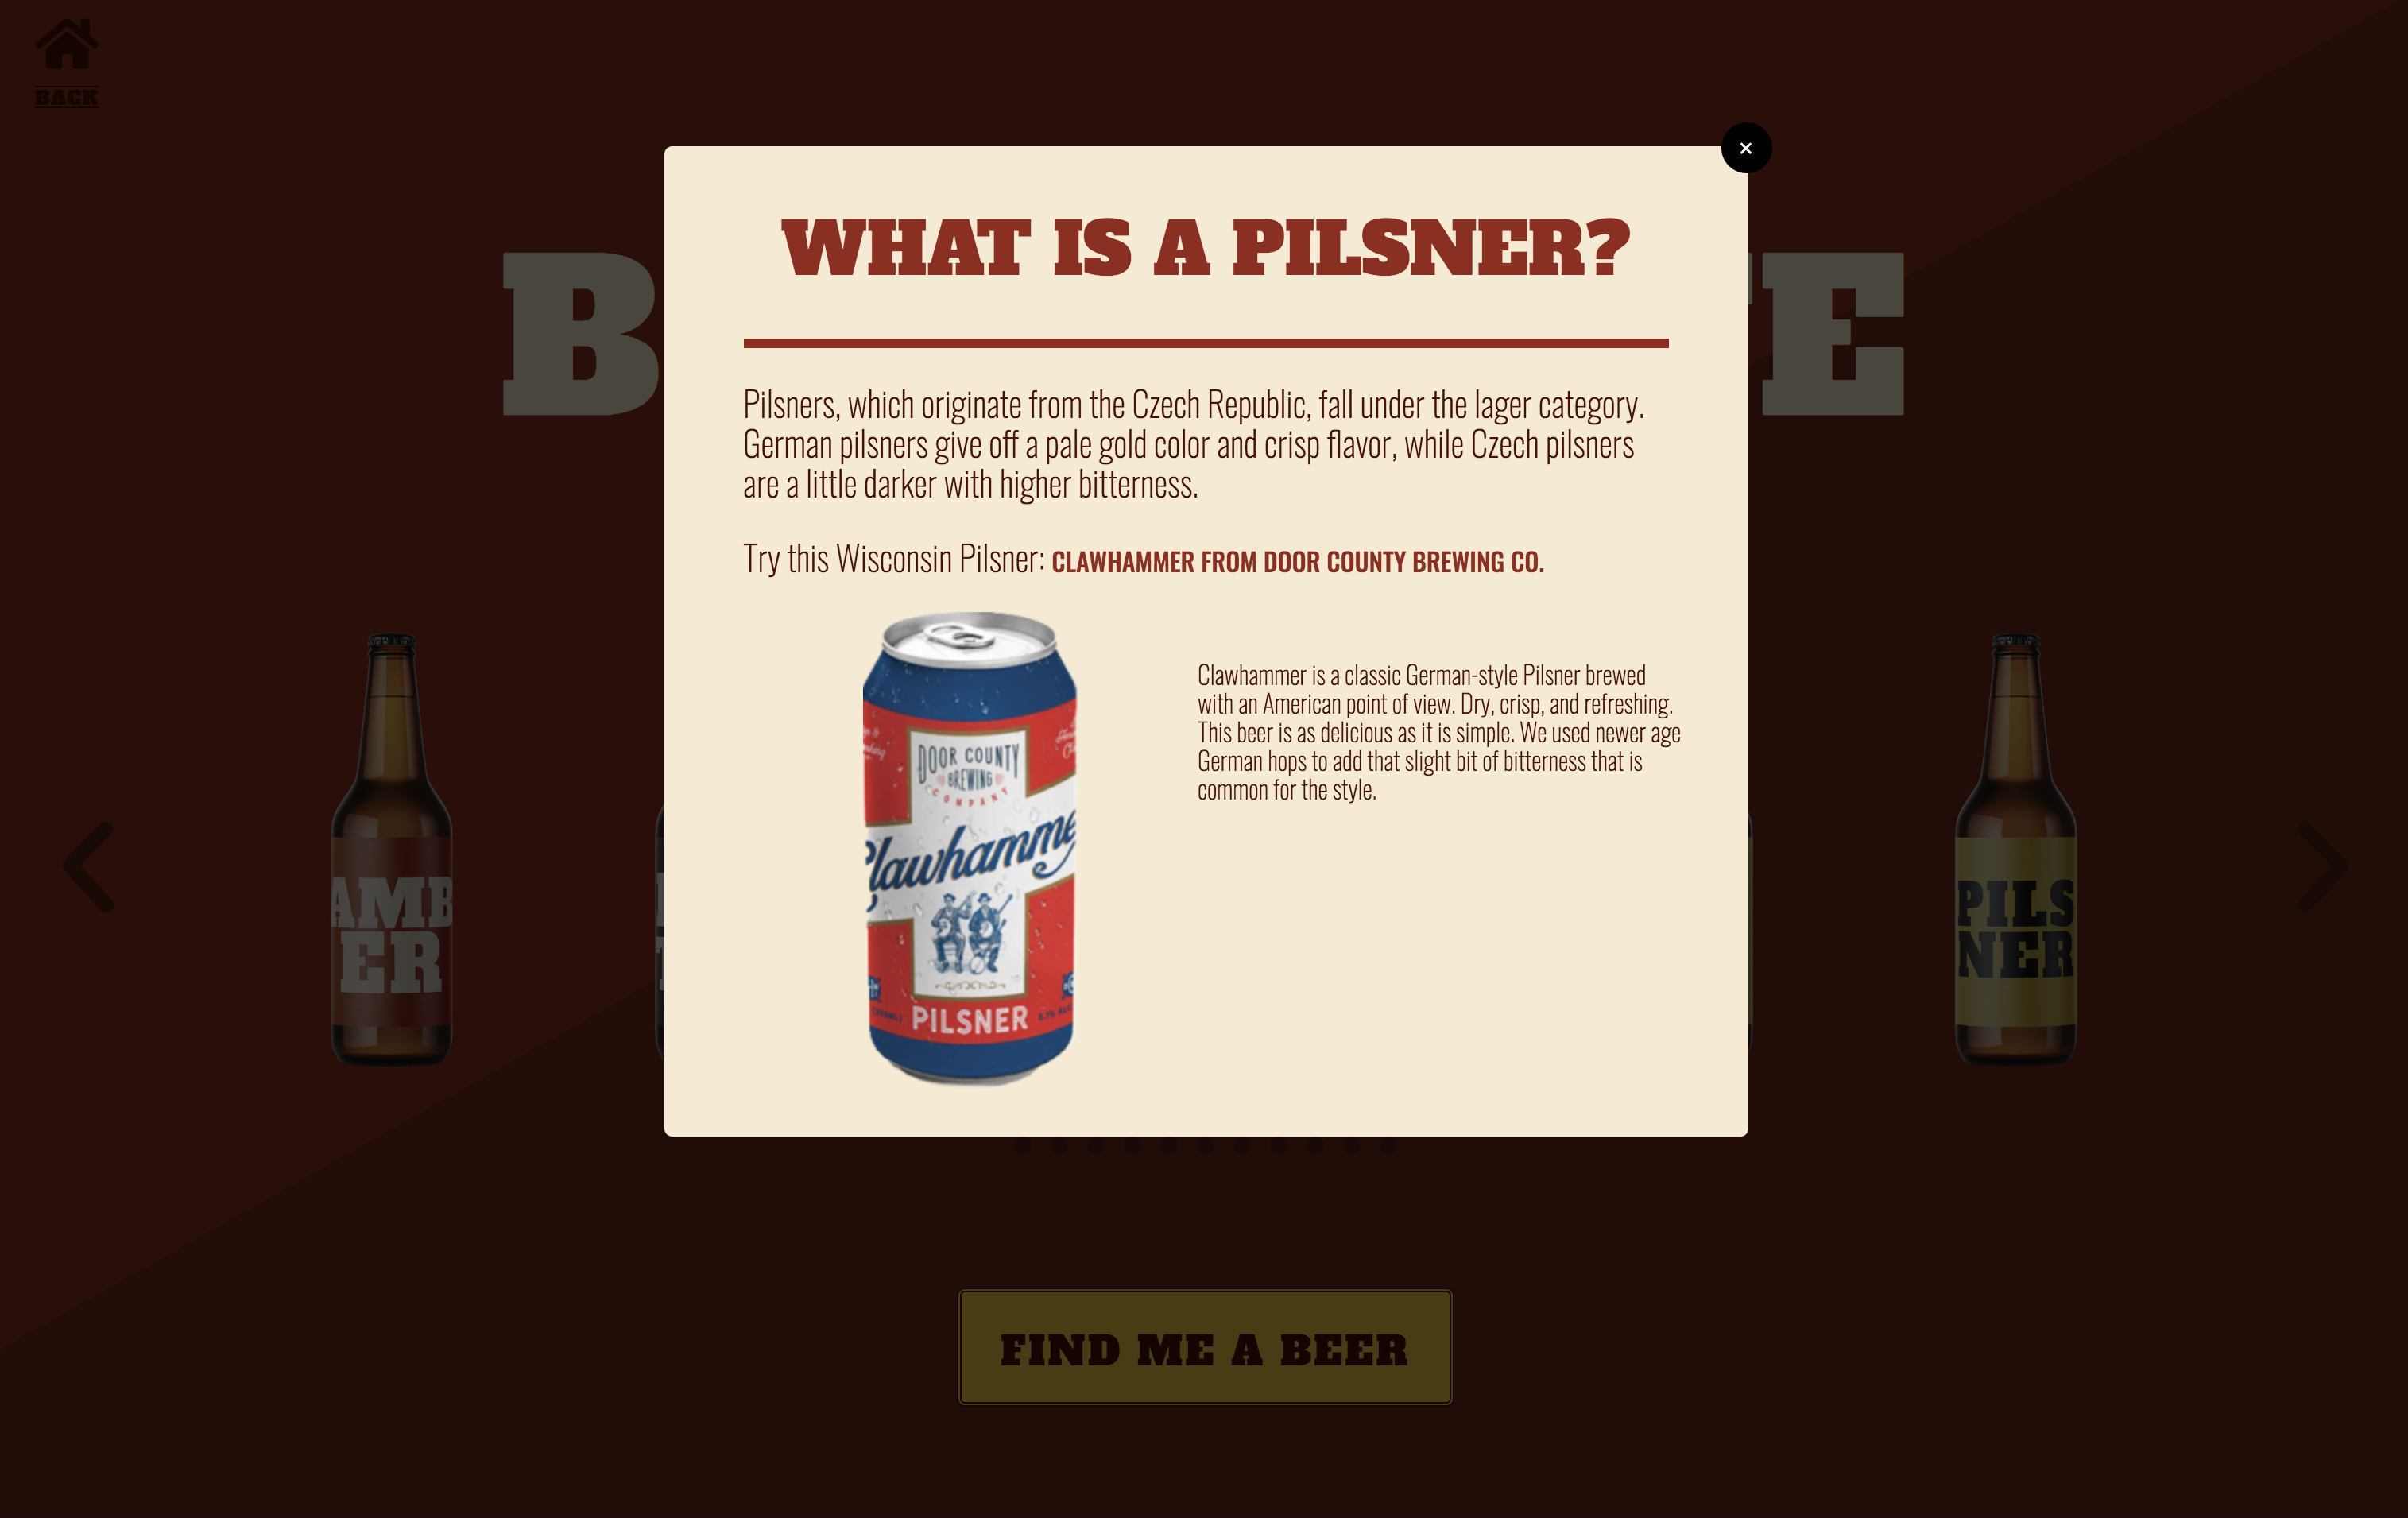 Beer style pop-up modal with quick facts